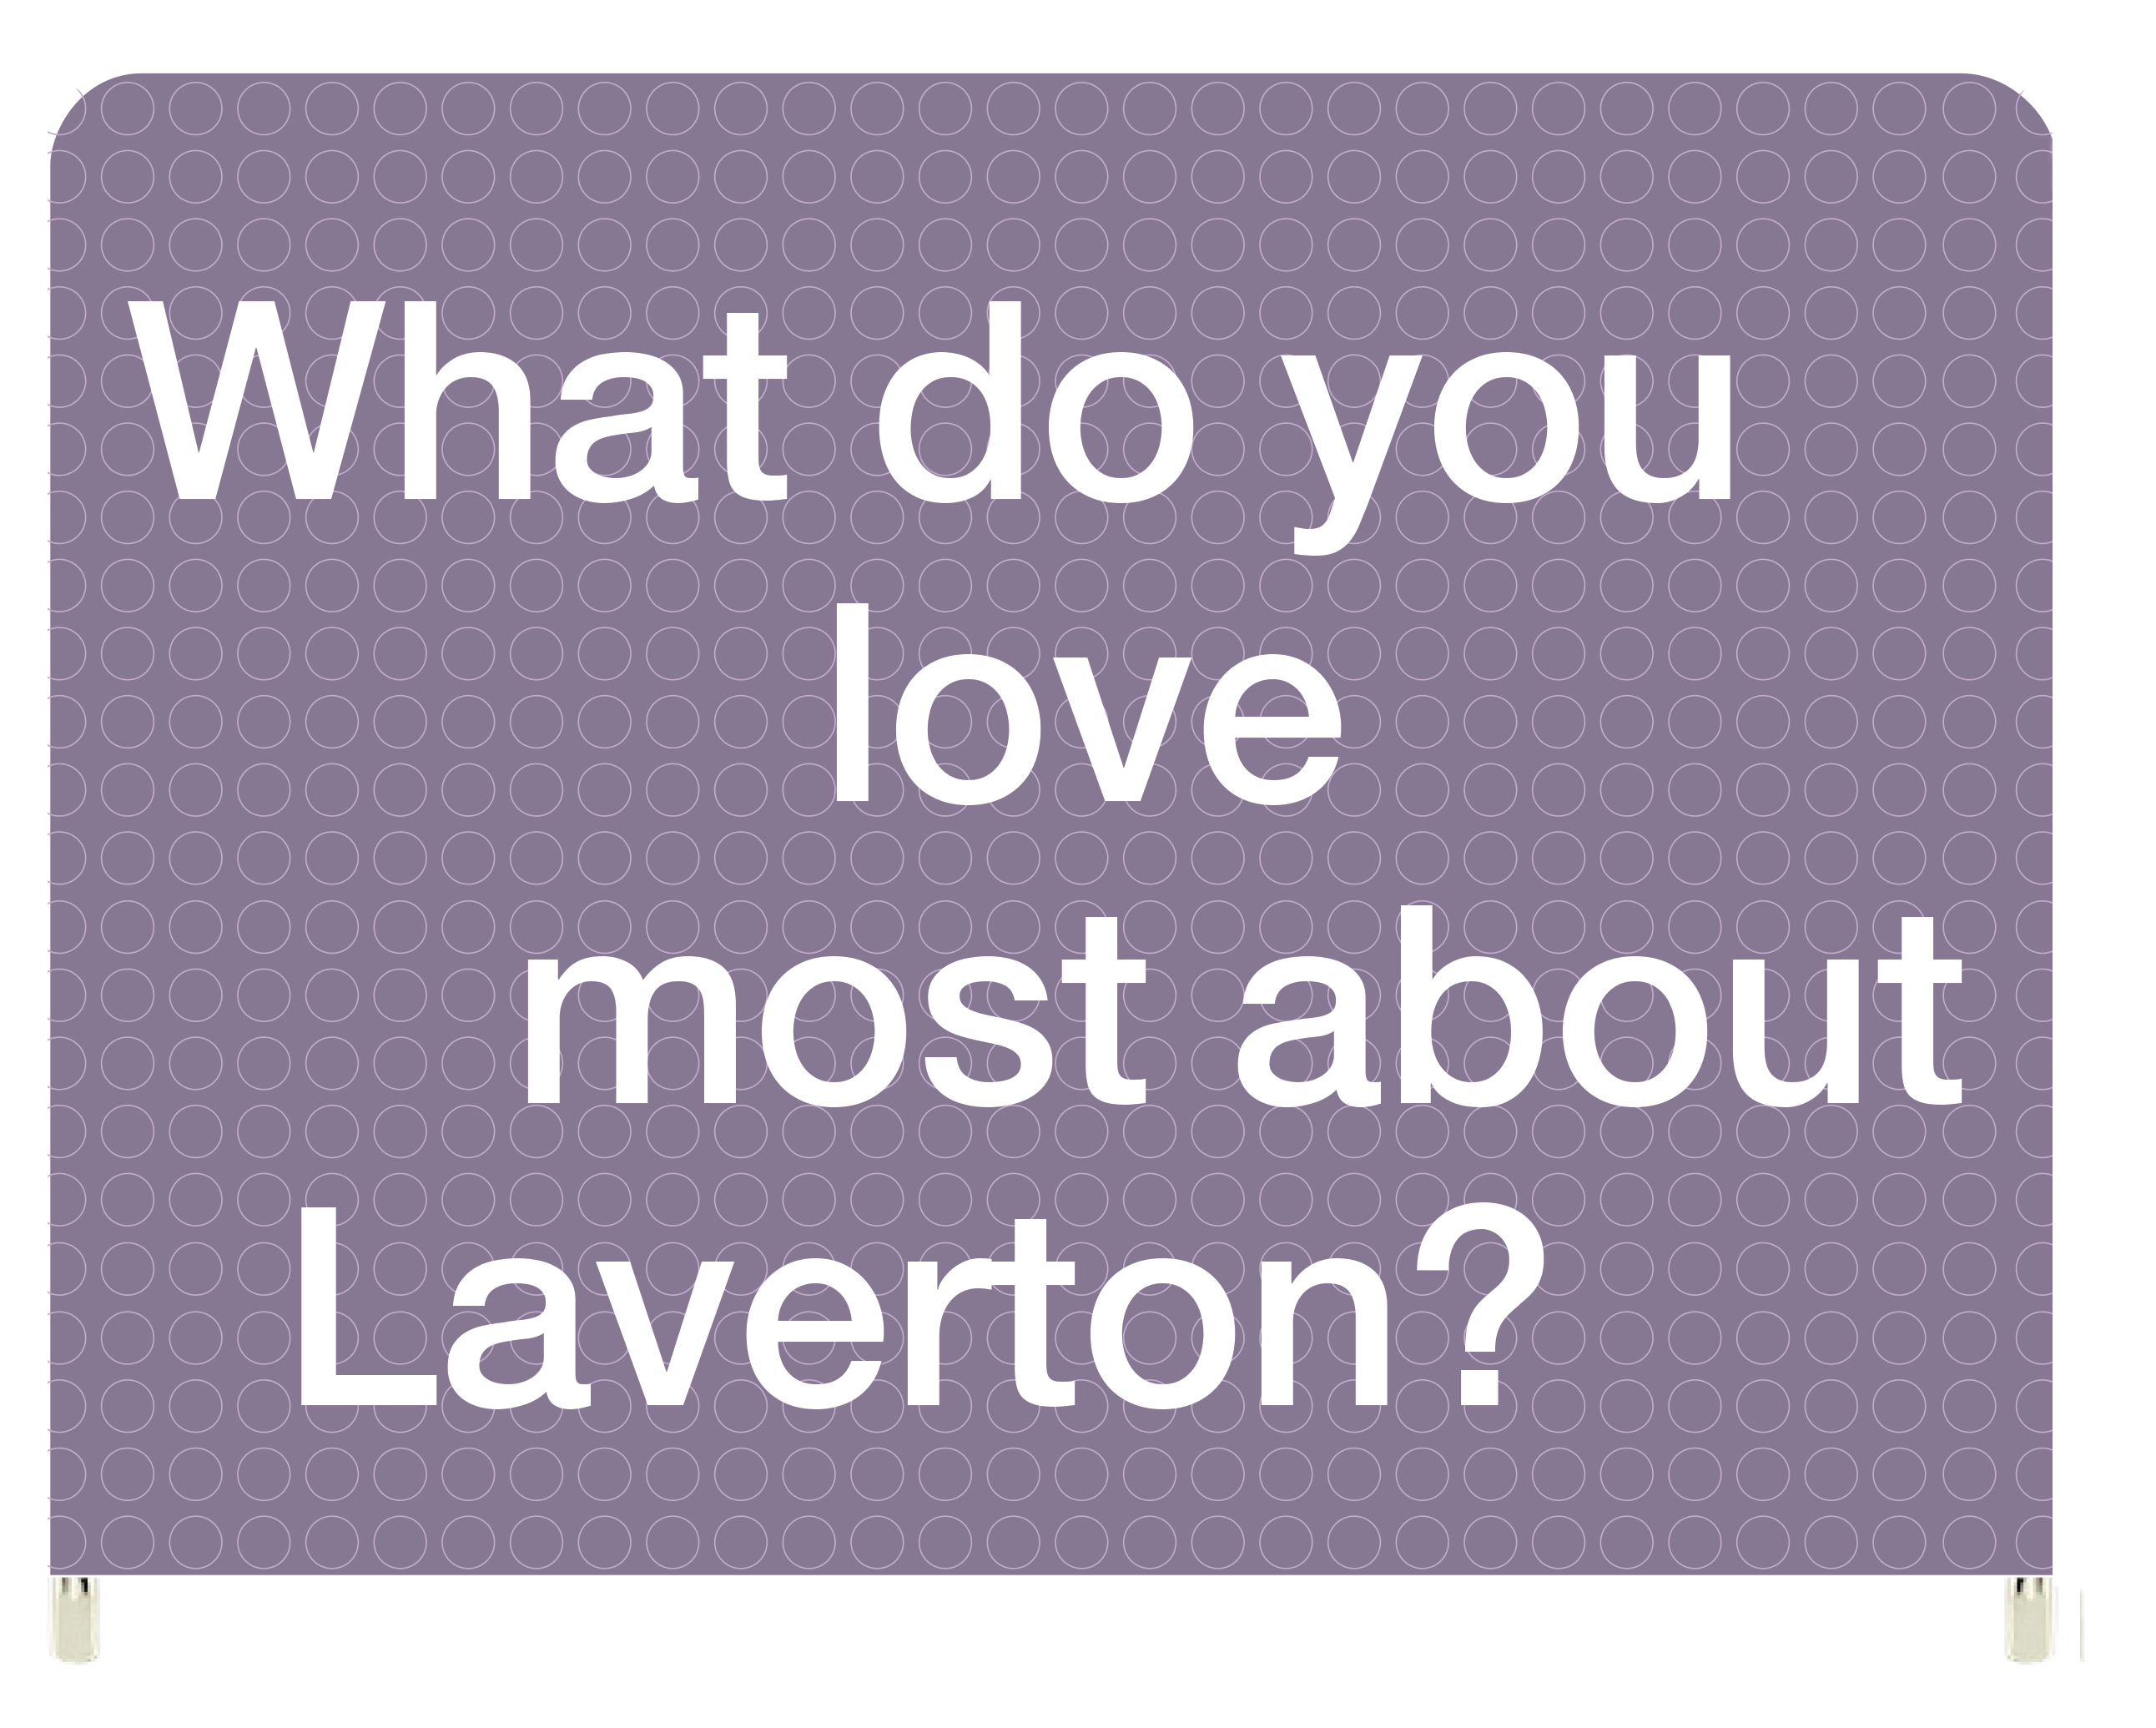 What do you love most about Laverton?